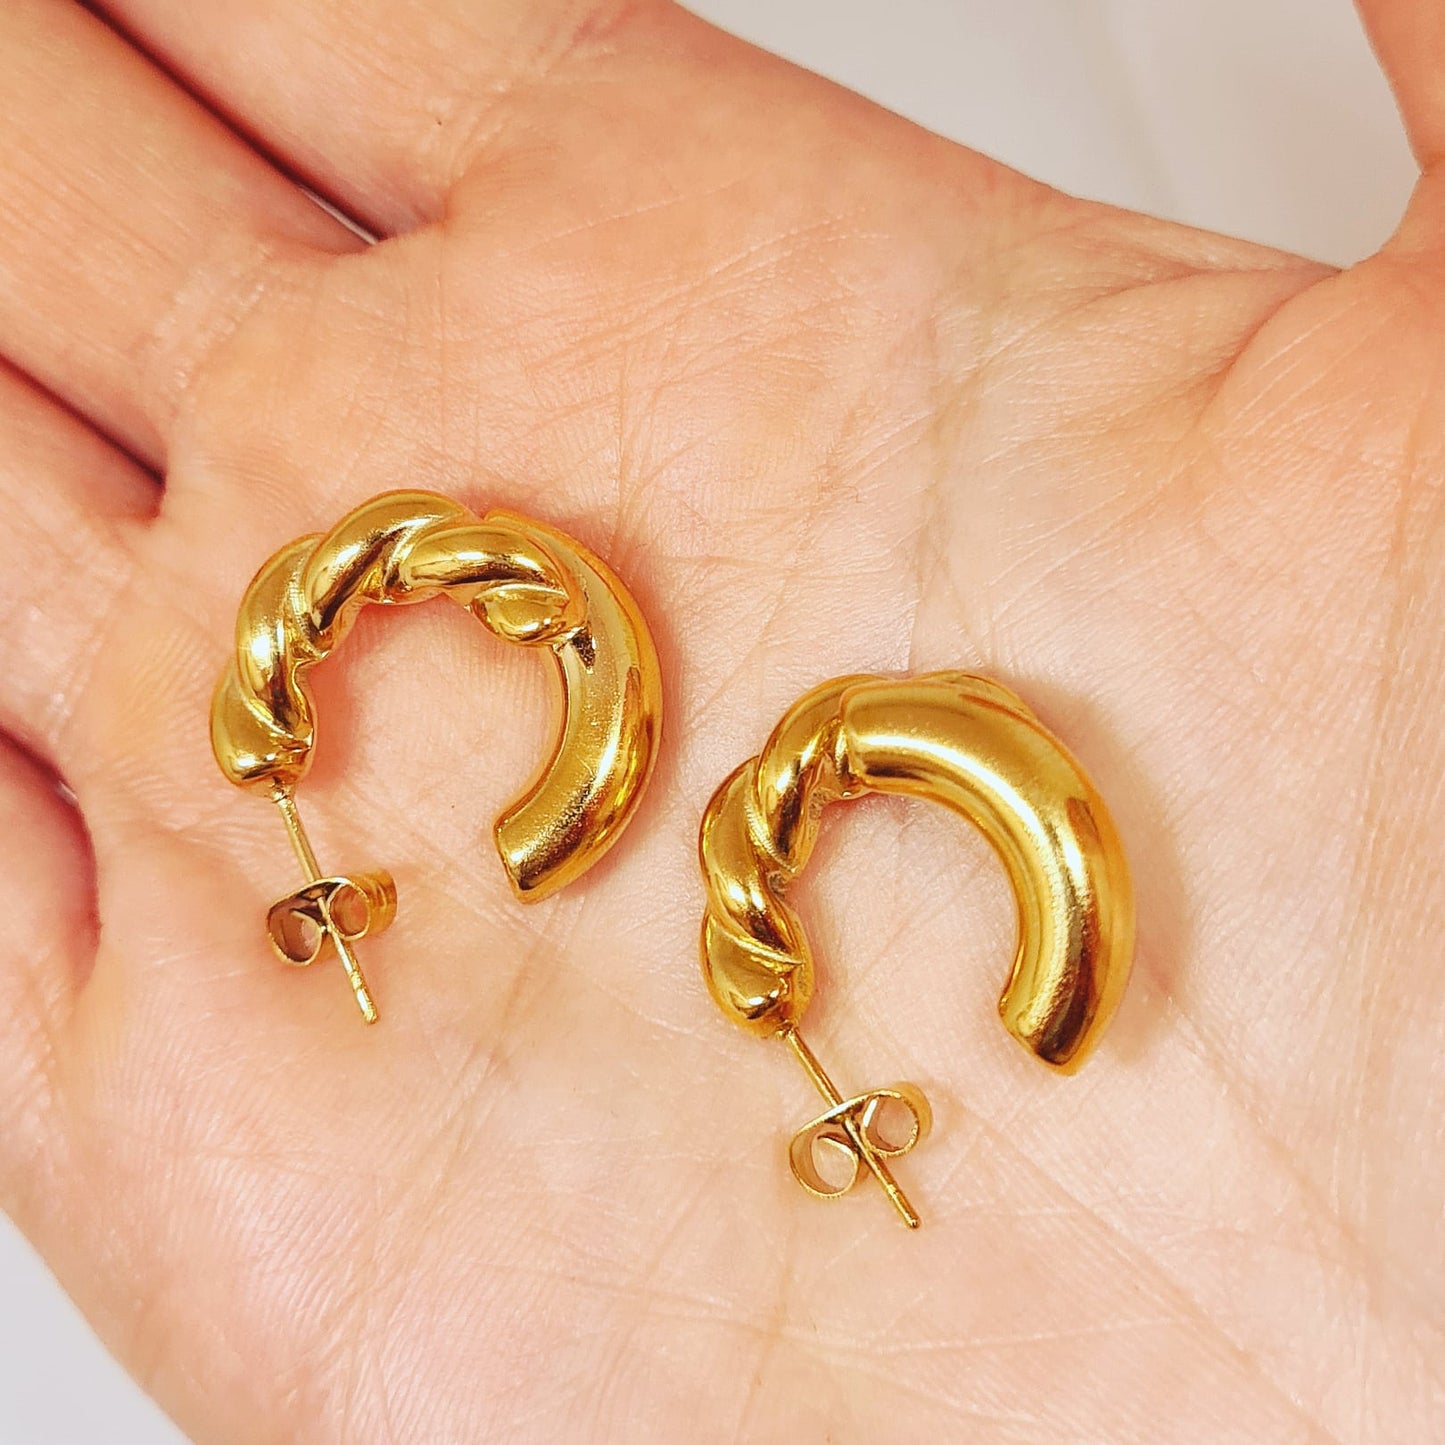 a hand holding Gold hoop earrings. The earrings are a classic and elegant style that would be perfect for any occasion. The earrings are made of gold and have a hoop design. The hoops are large and round.